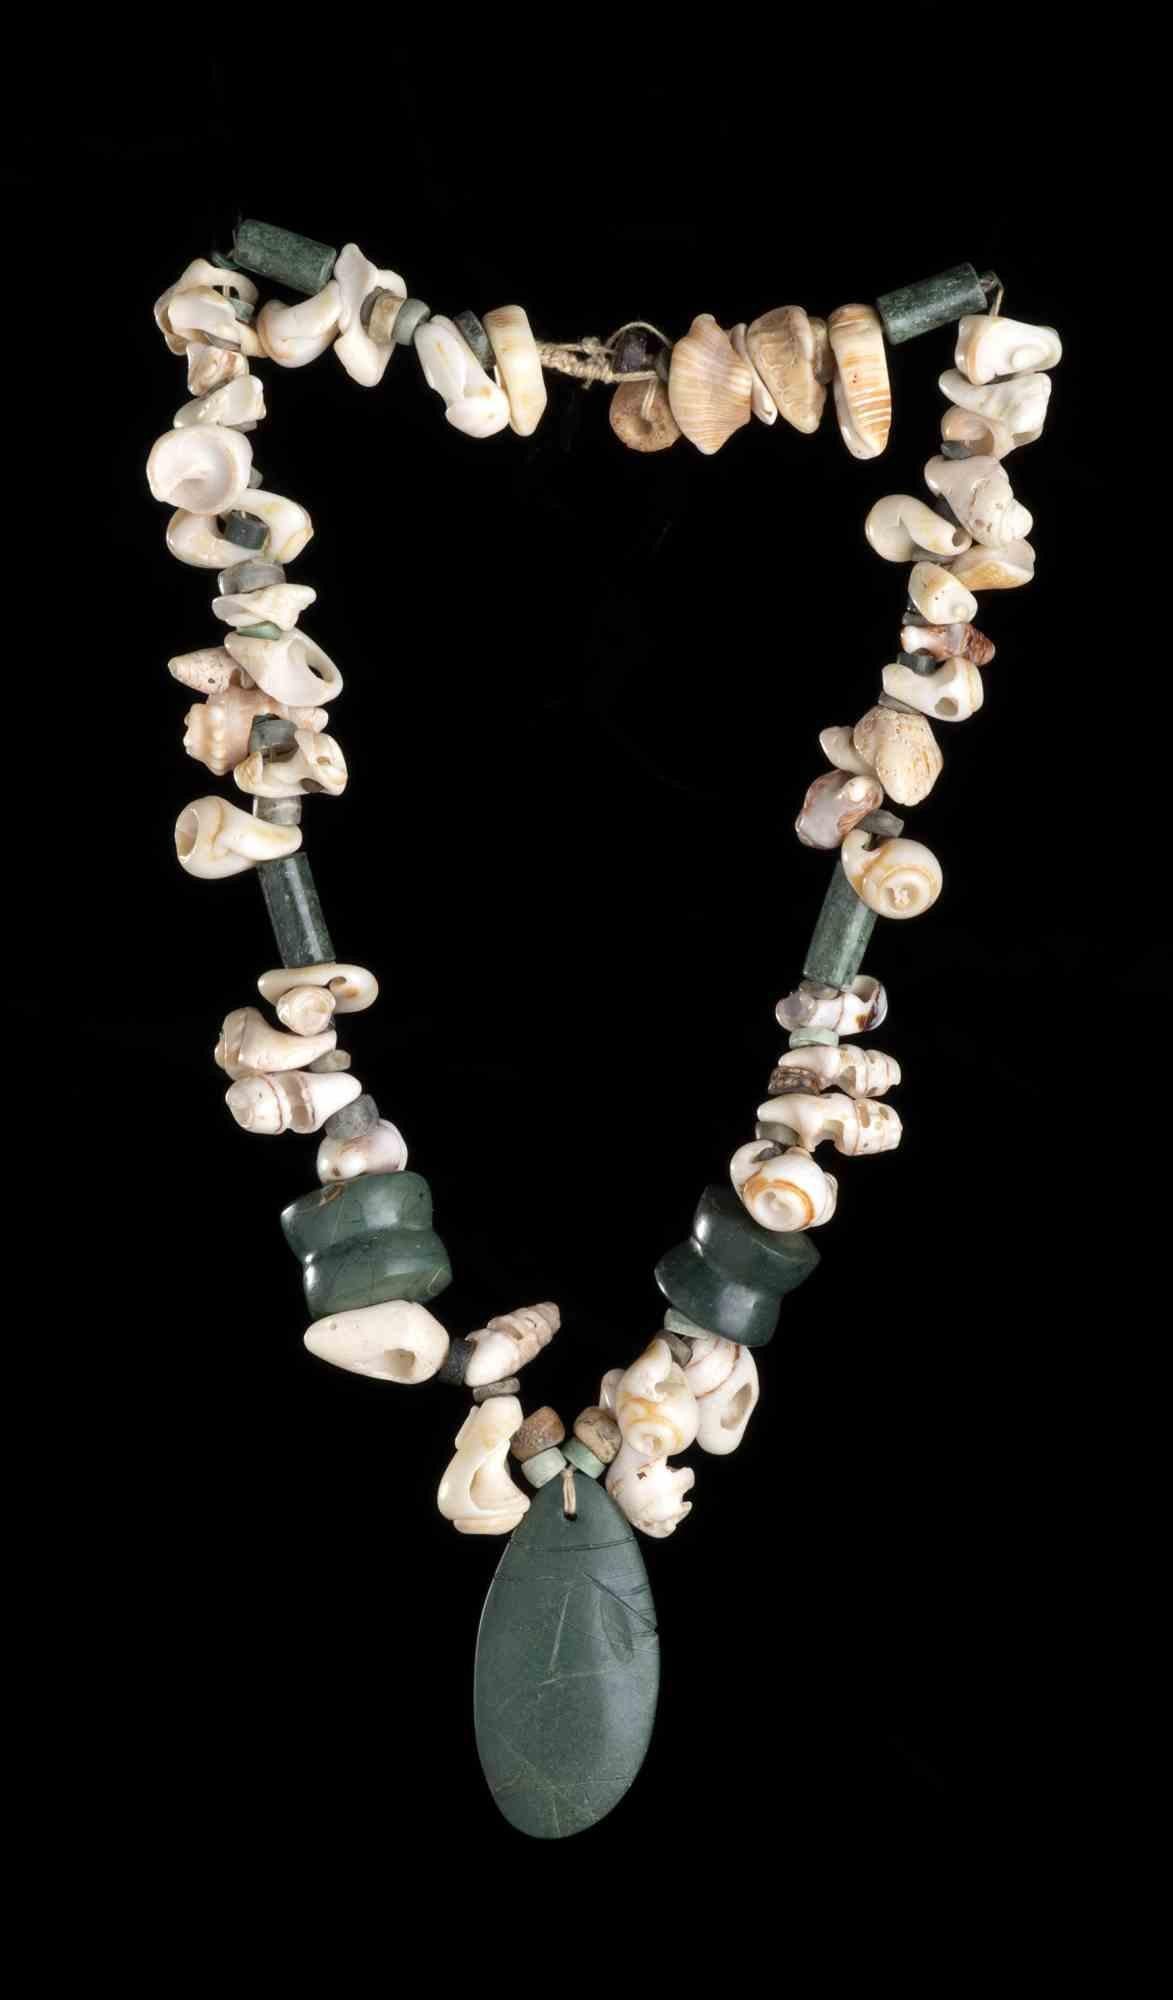 Italian Set of Five Ethnic Necklaces in Different Materials, Early 20th Century